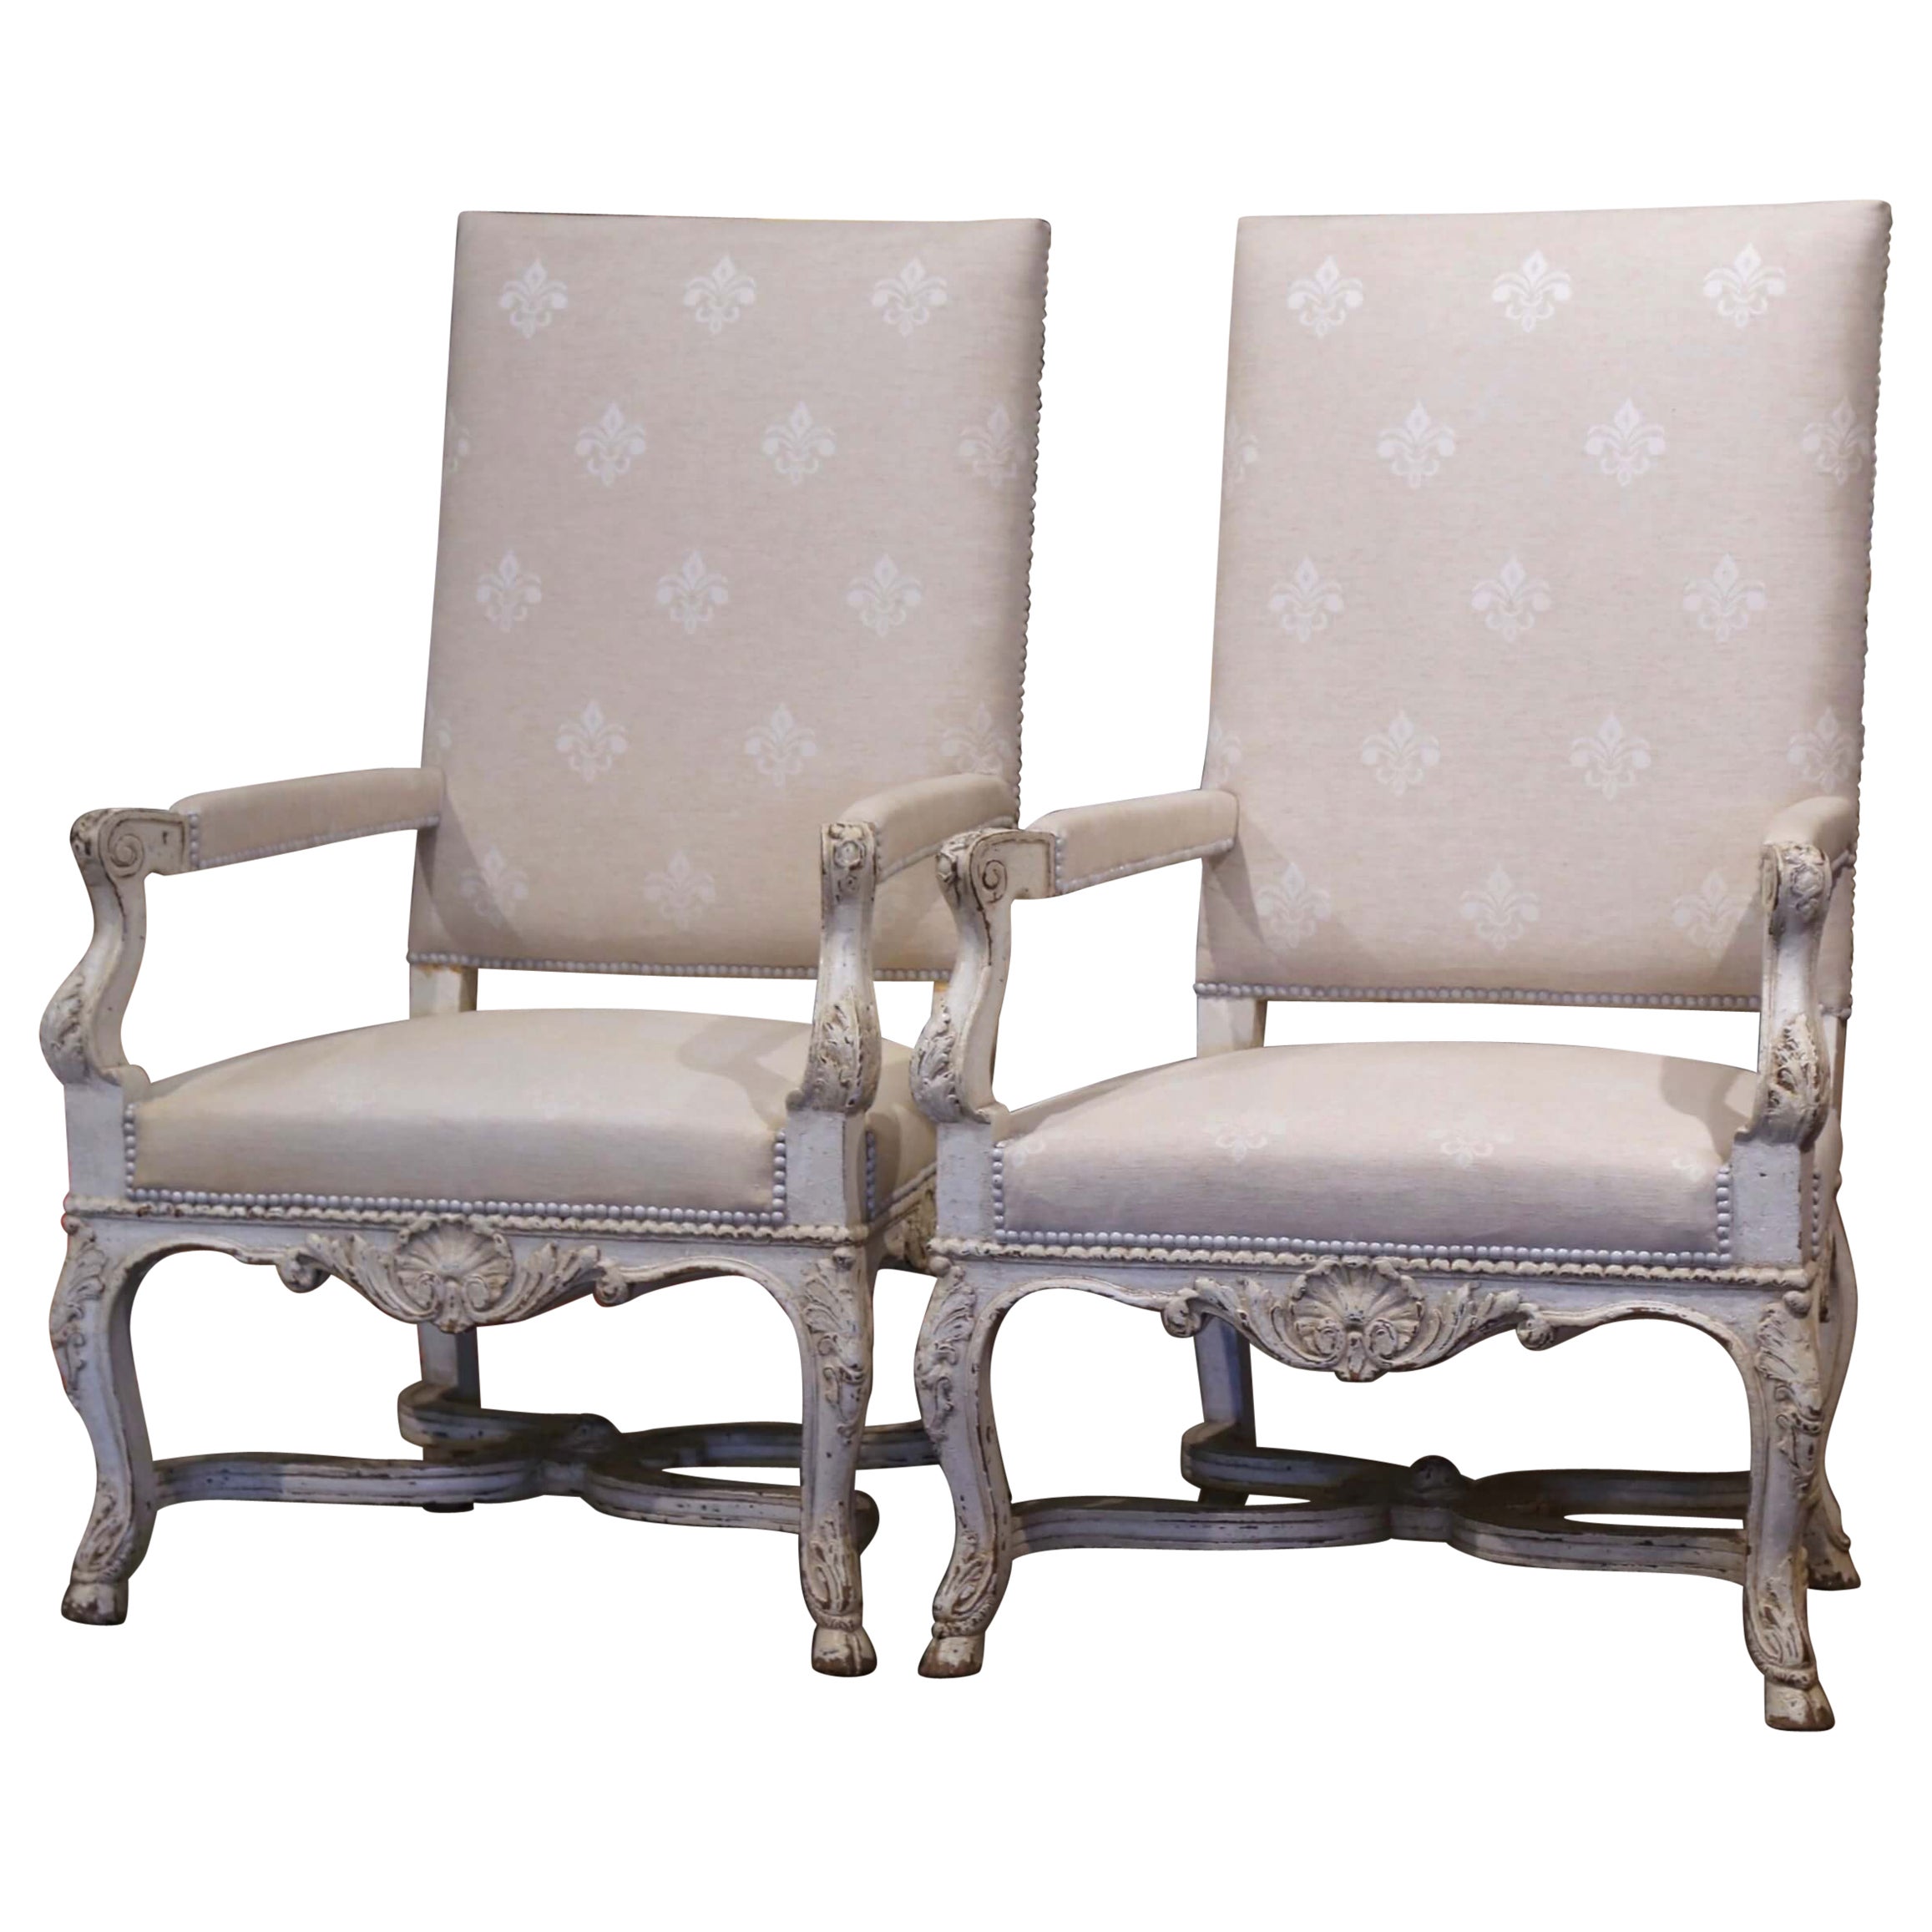 Pair of 19th Century Louis XIV Carved Painted Armchairs with Fleur-de-Lys Fabric For Sale